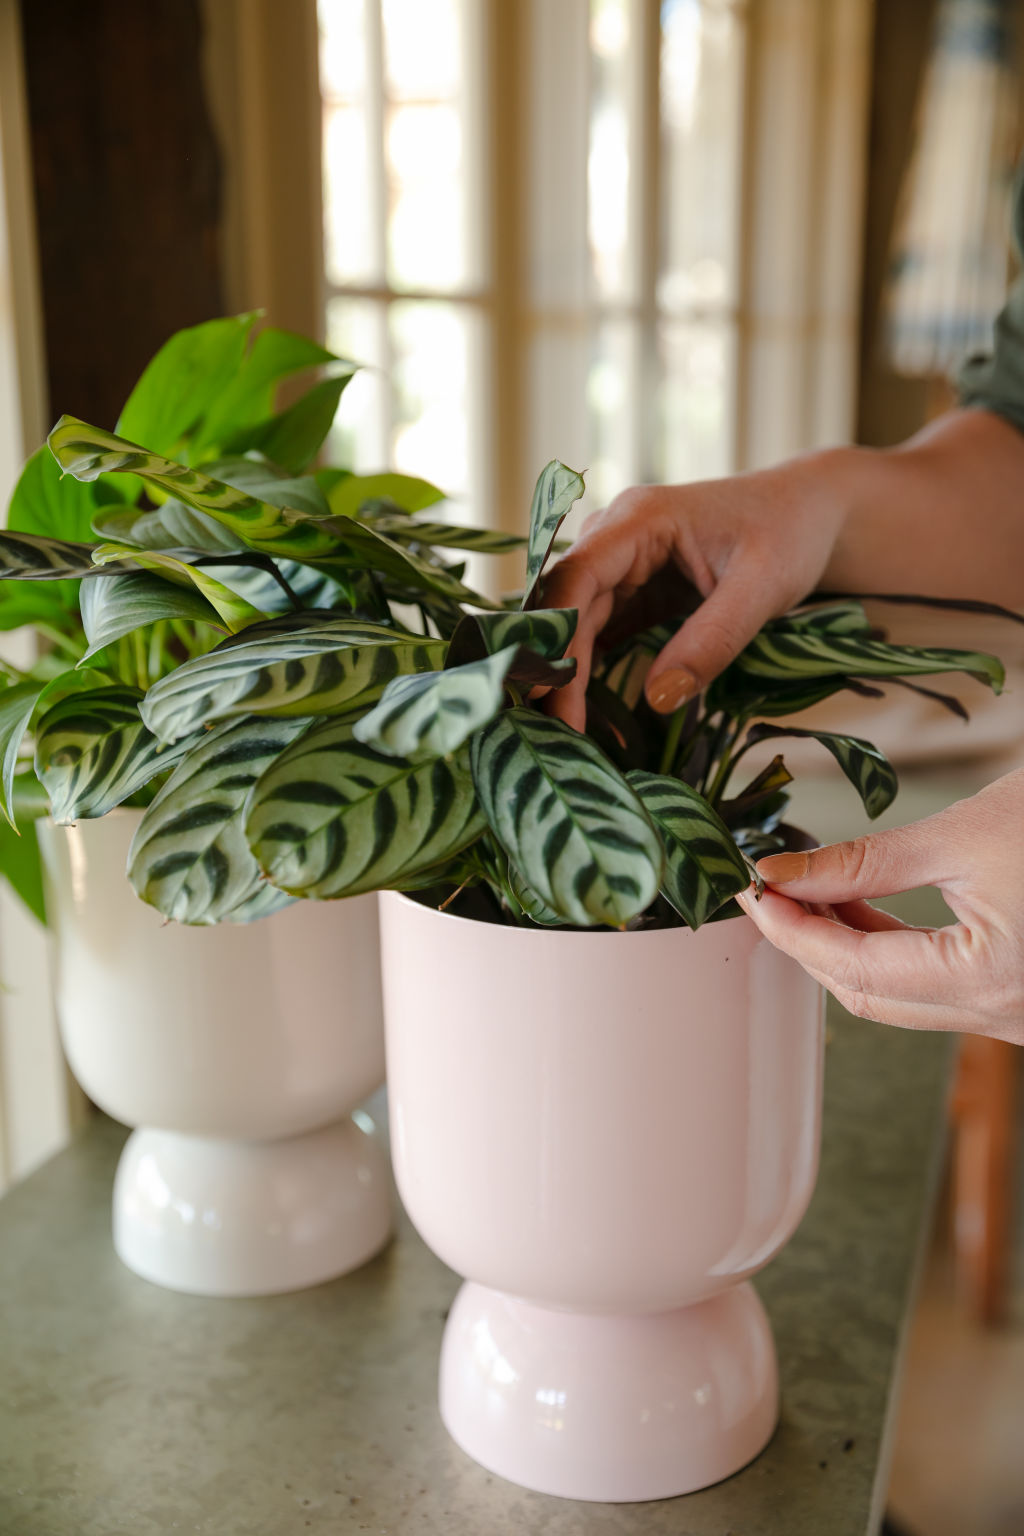 You may have to move your plants closer to a window in winter to make sure they get enough light. Photo: Trudy Pagden